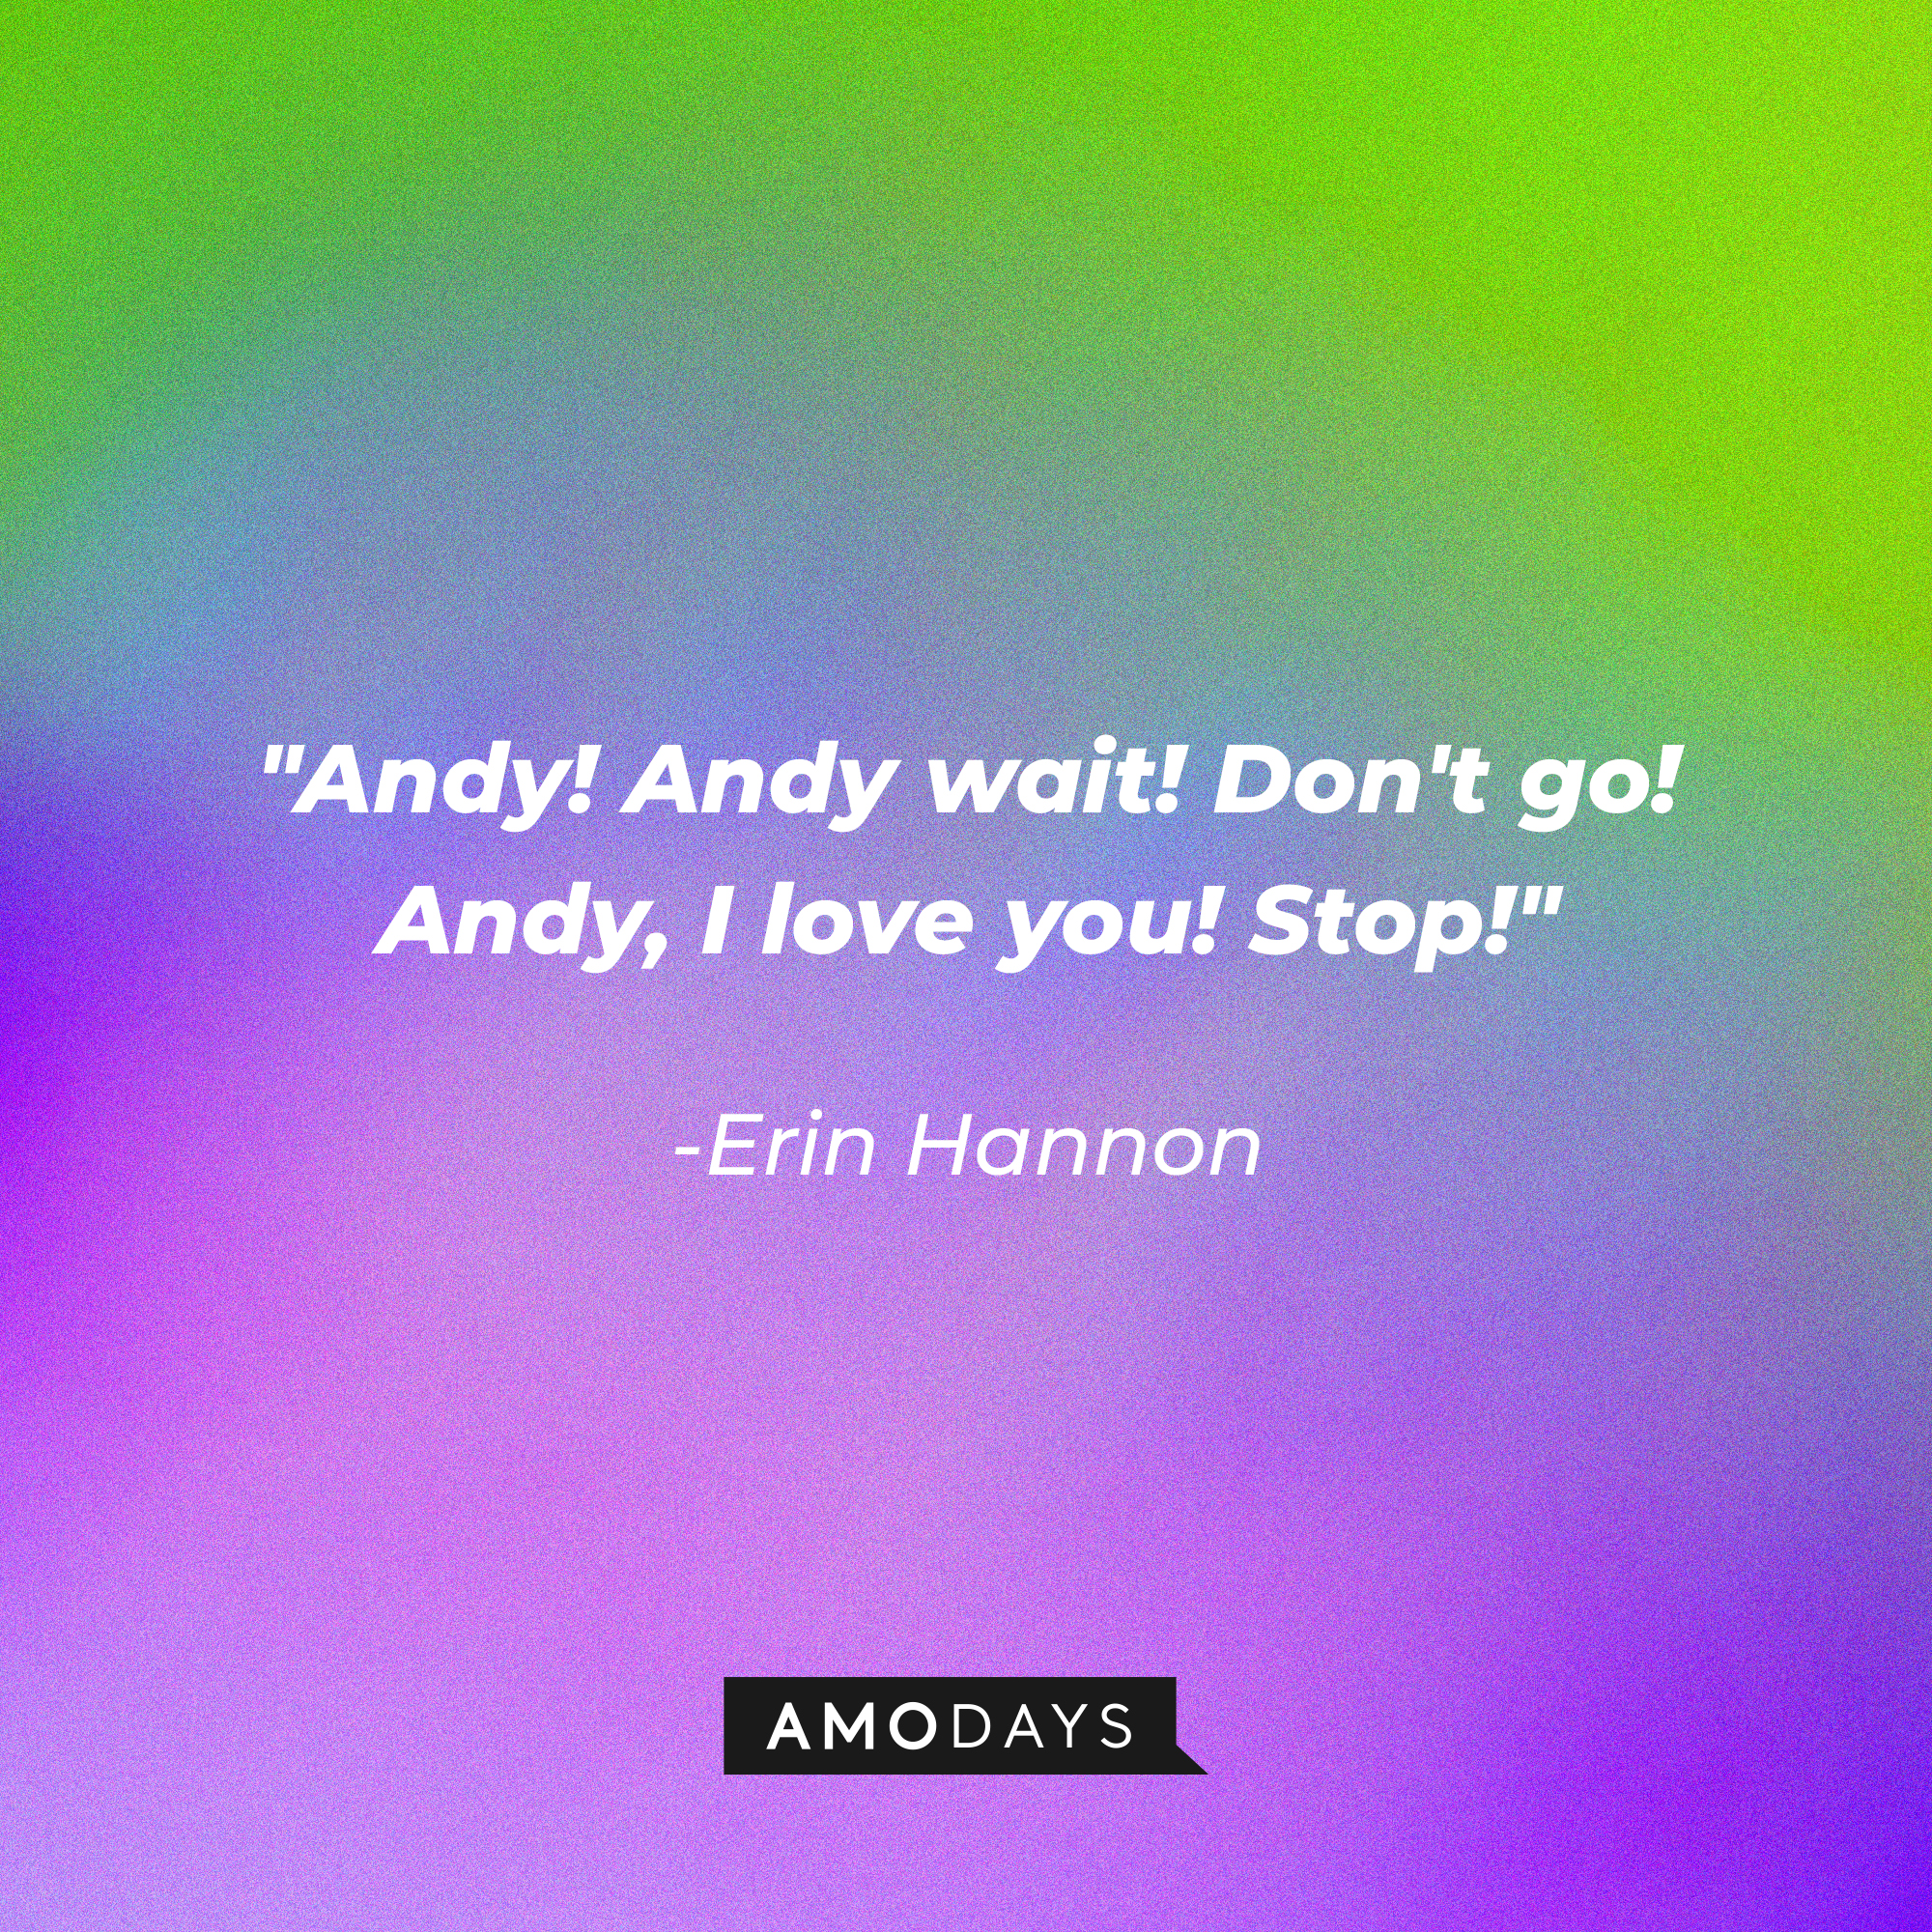 Erin Hannon’s quote: "Andy! Andy wait! Don't go! Andy, I love you! Stop!" | Image: AmoDays